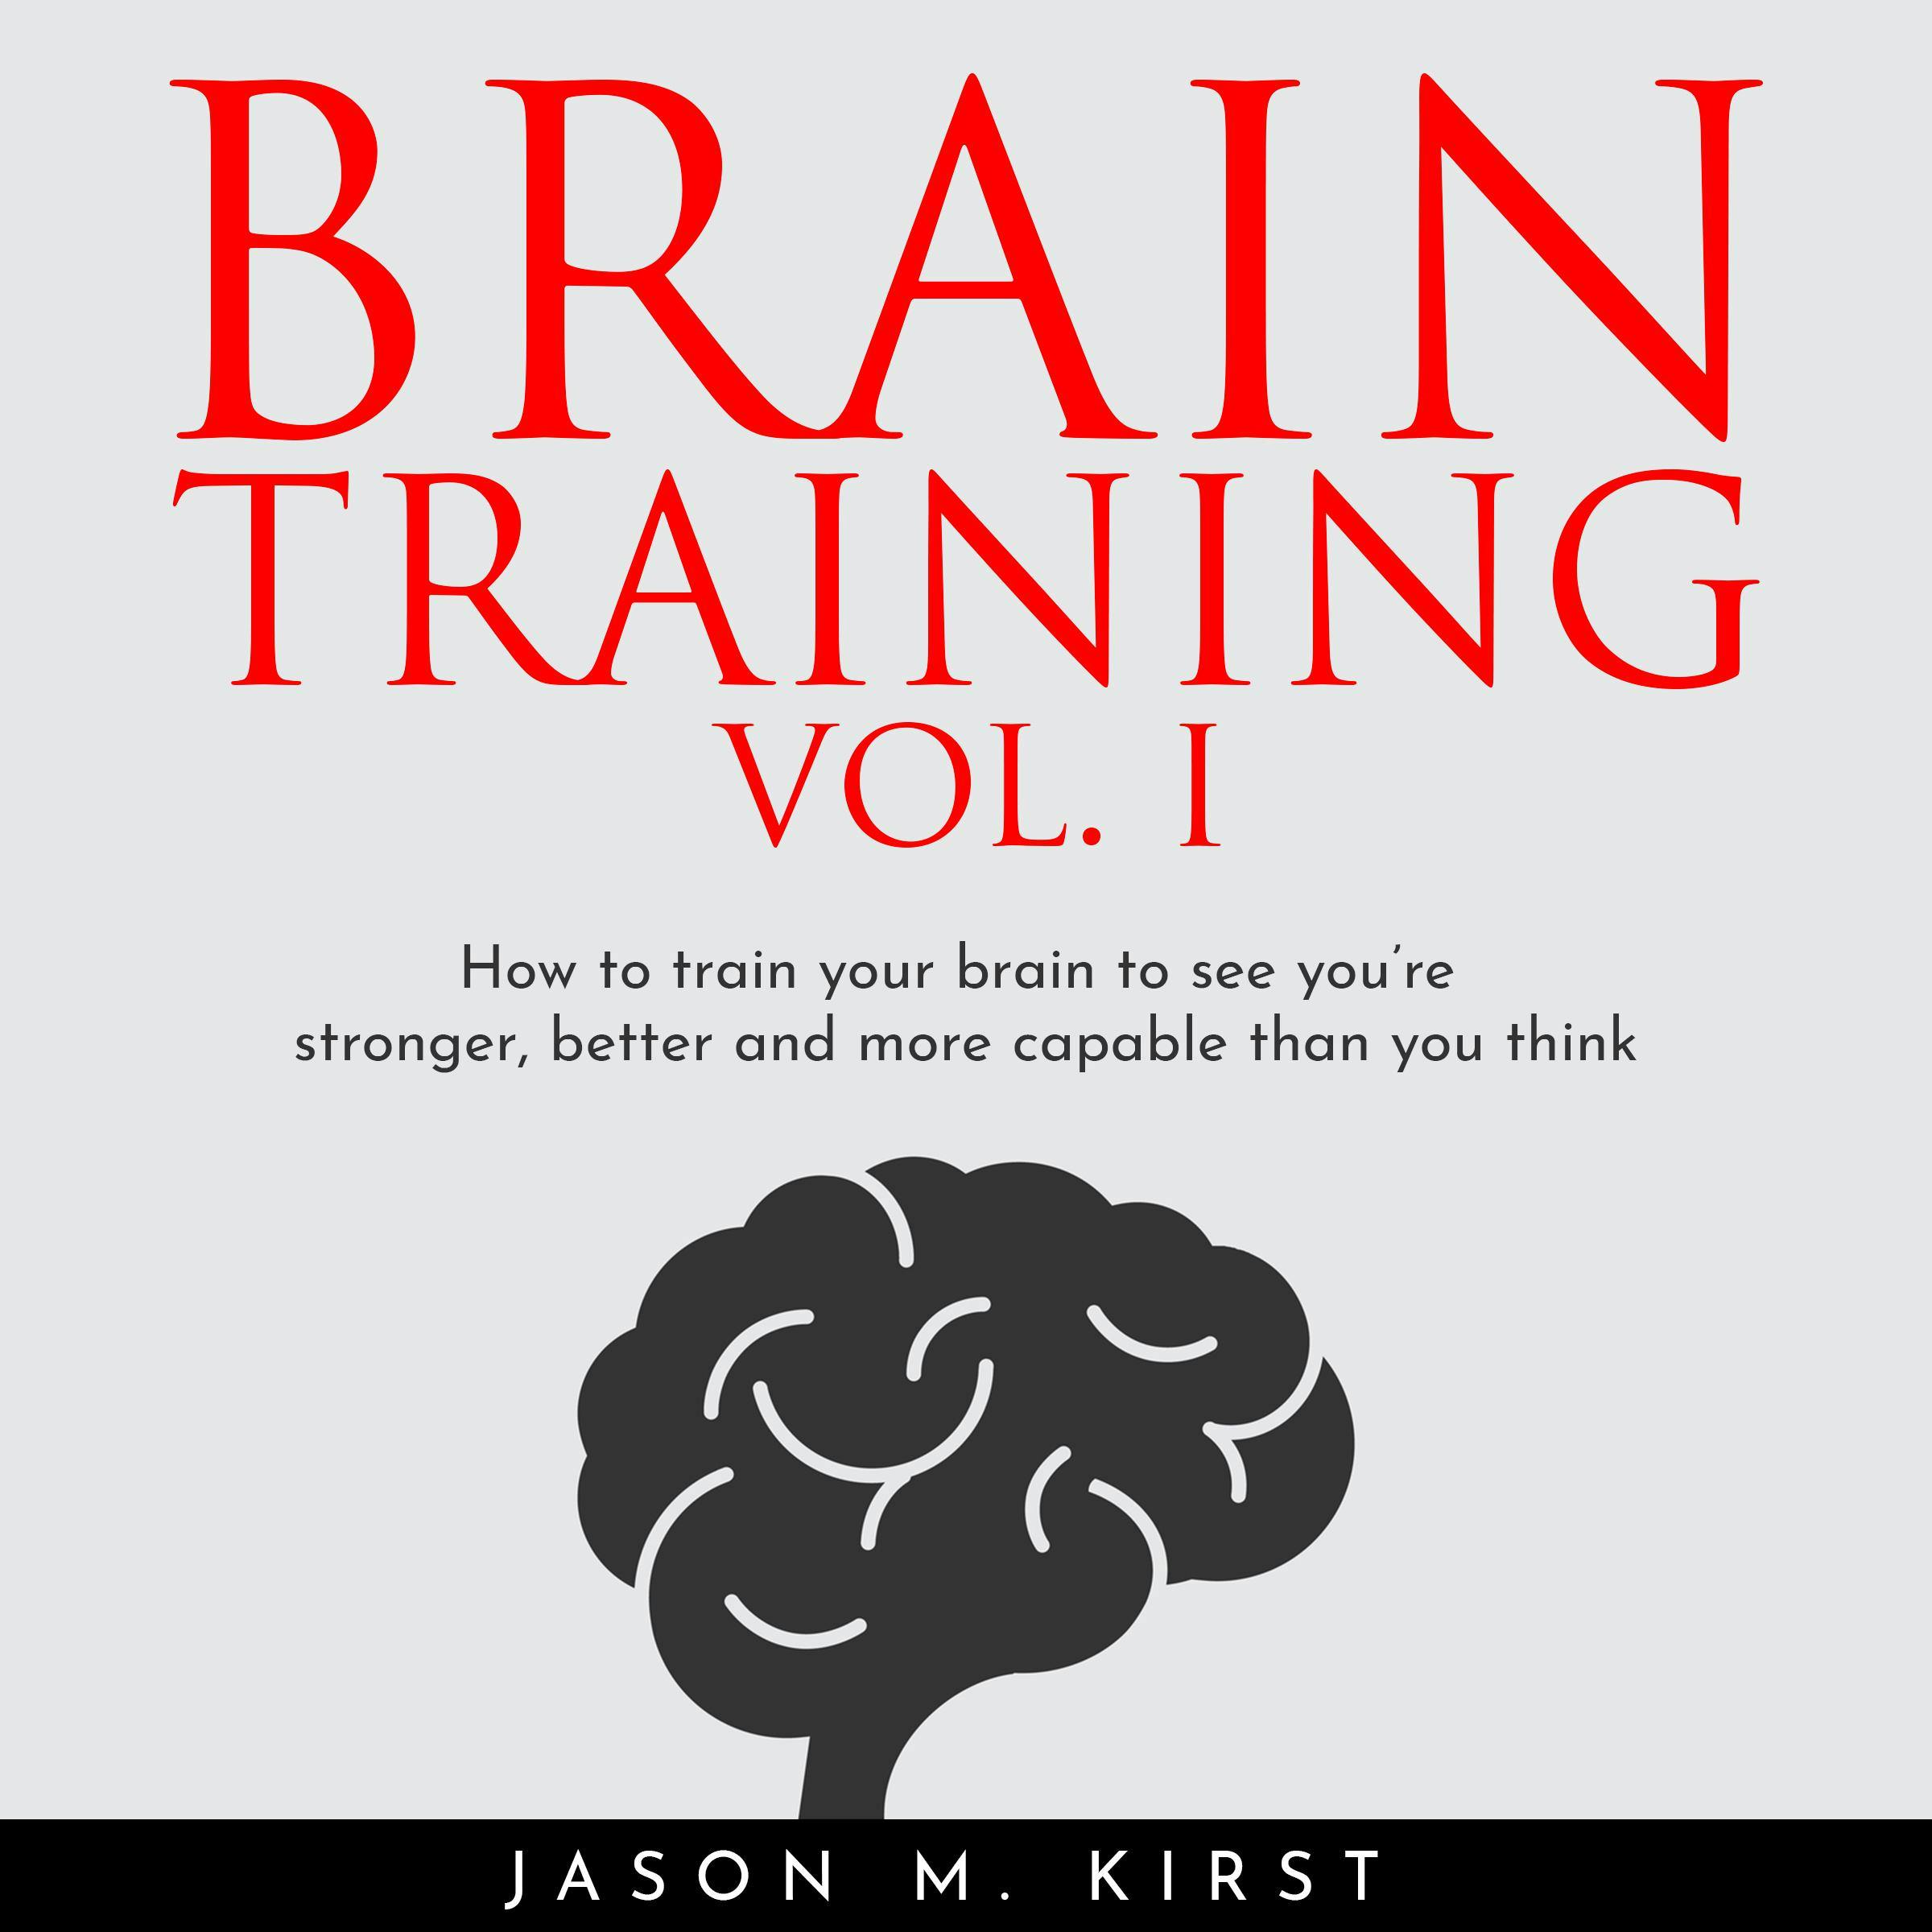 BRAIN TRAINING VOL. I : HOW TO TRAIN YOUR BRAIN TO SEE YOU’RE STRONGER, BETTER AND MORE CAPABLE THAN YOU THINK - undefined